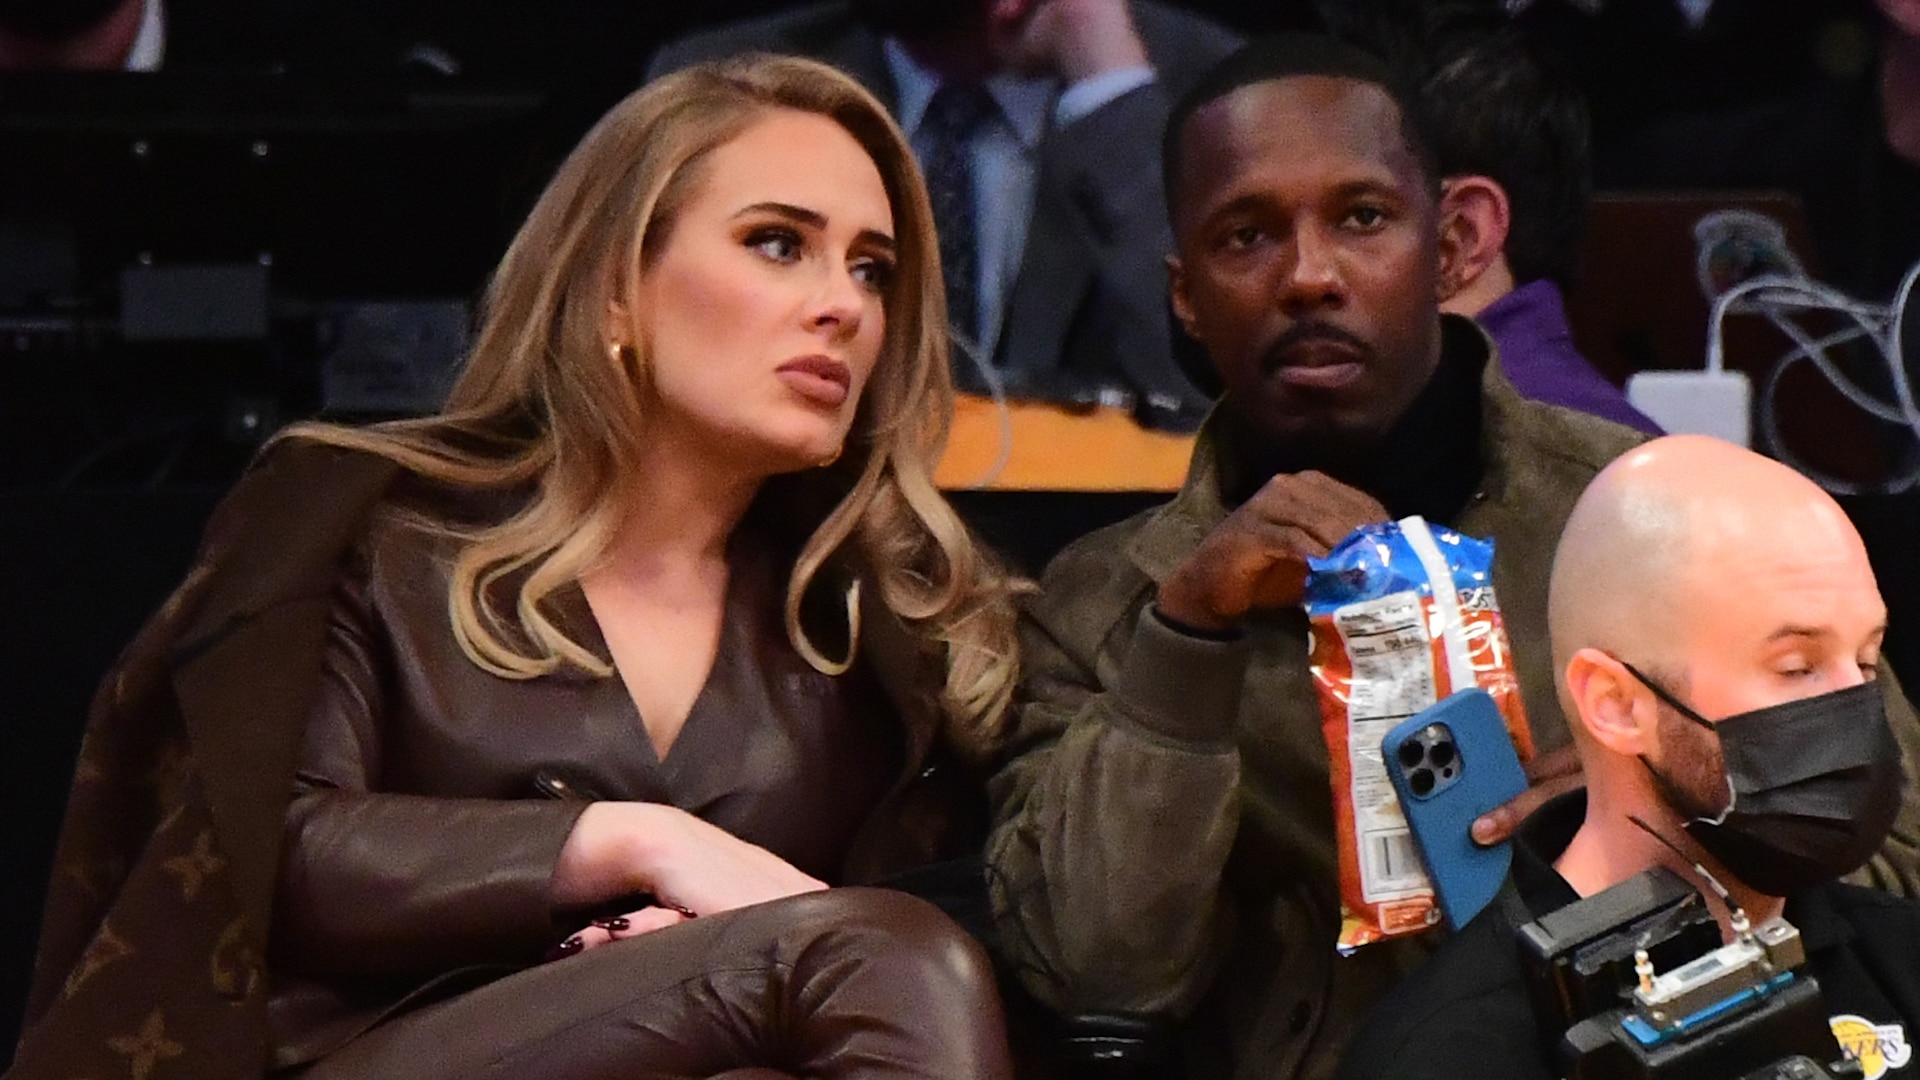 Adele Goes Instagram Official with Boyfriend Rich Paul! - The Hollywood  Gossip